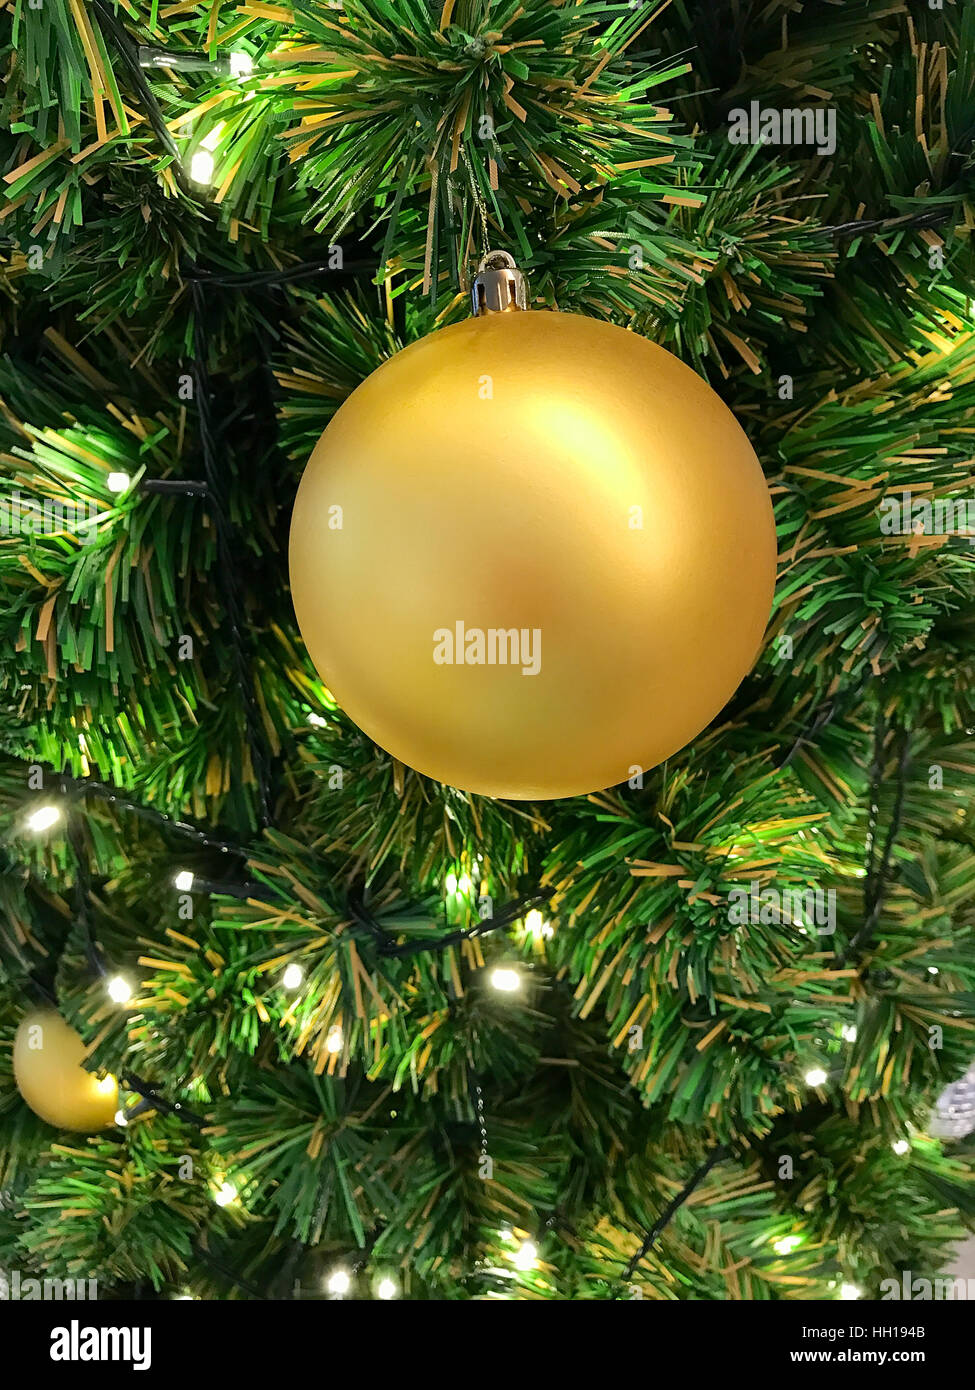 Gold ball hanging on Christmas tree for celebration Stock Photo